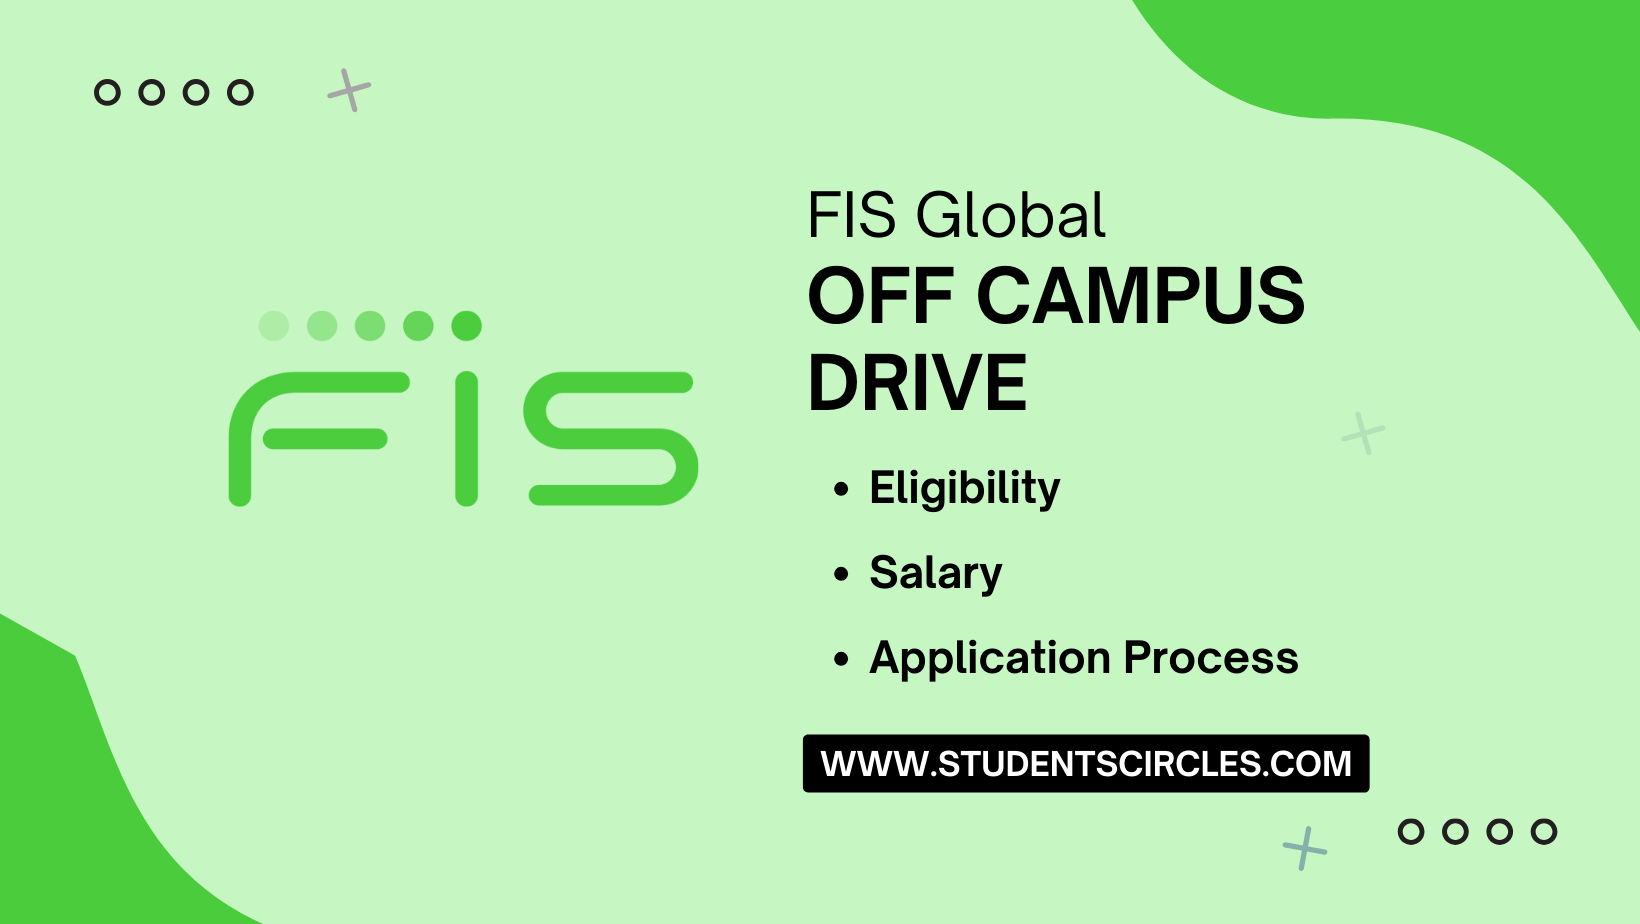 FIS Global Off Campus Drive